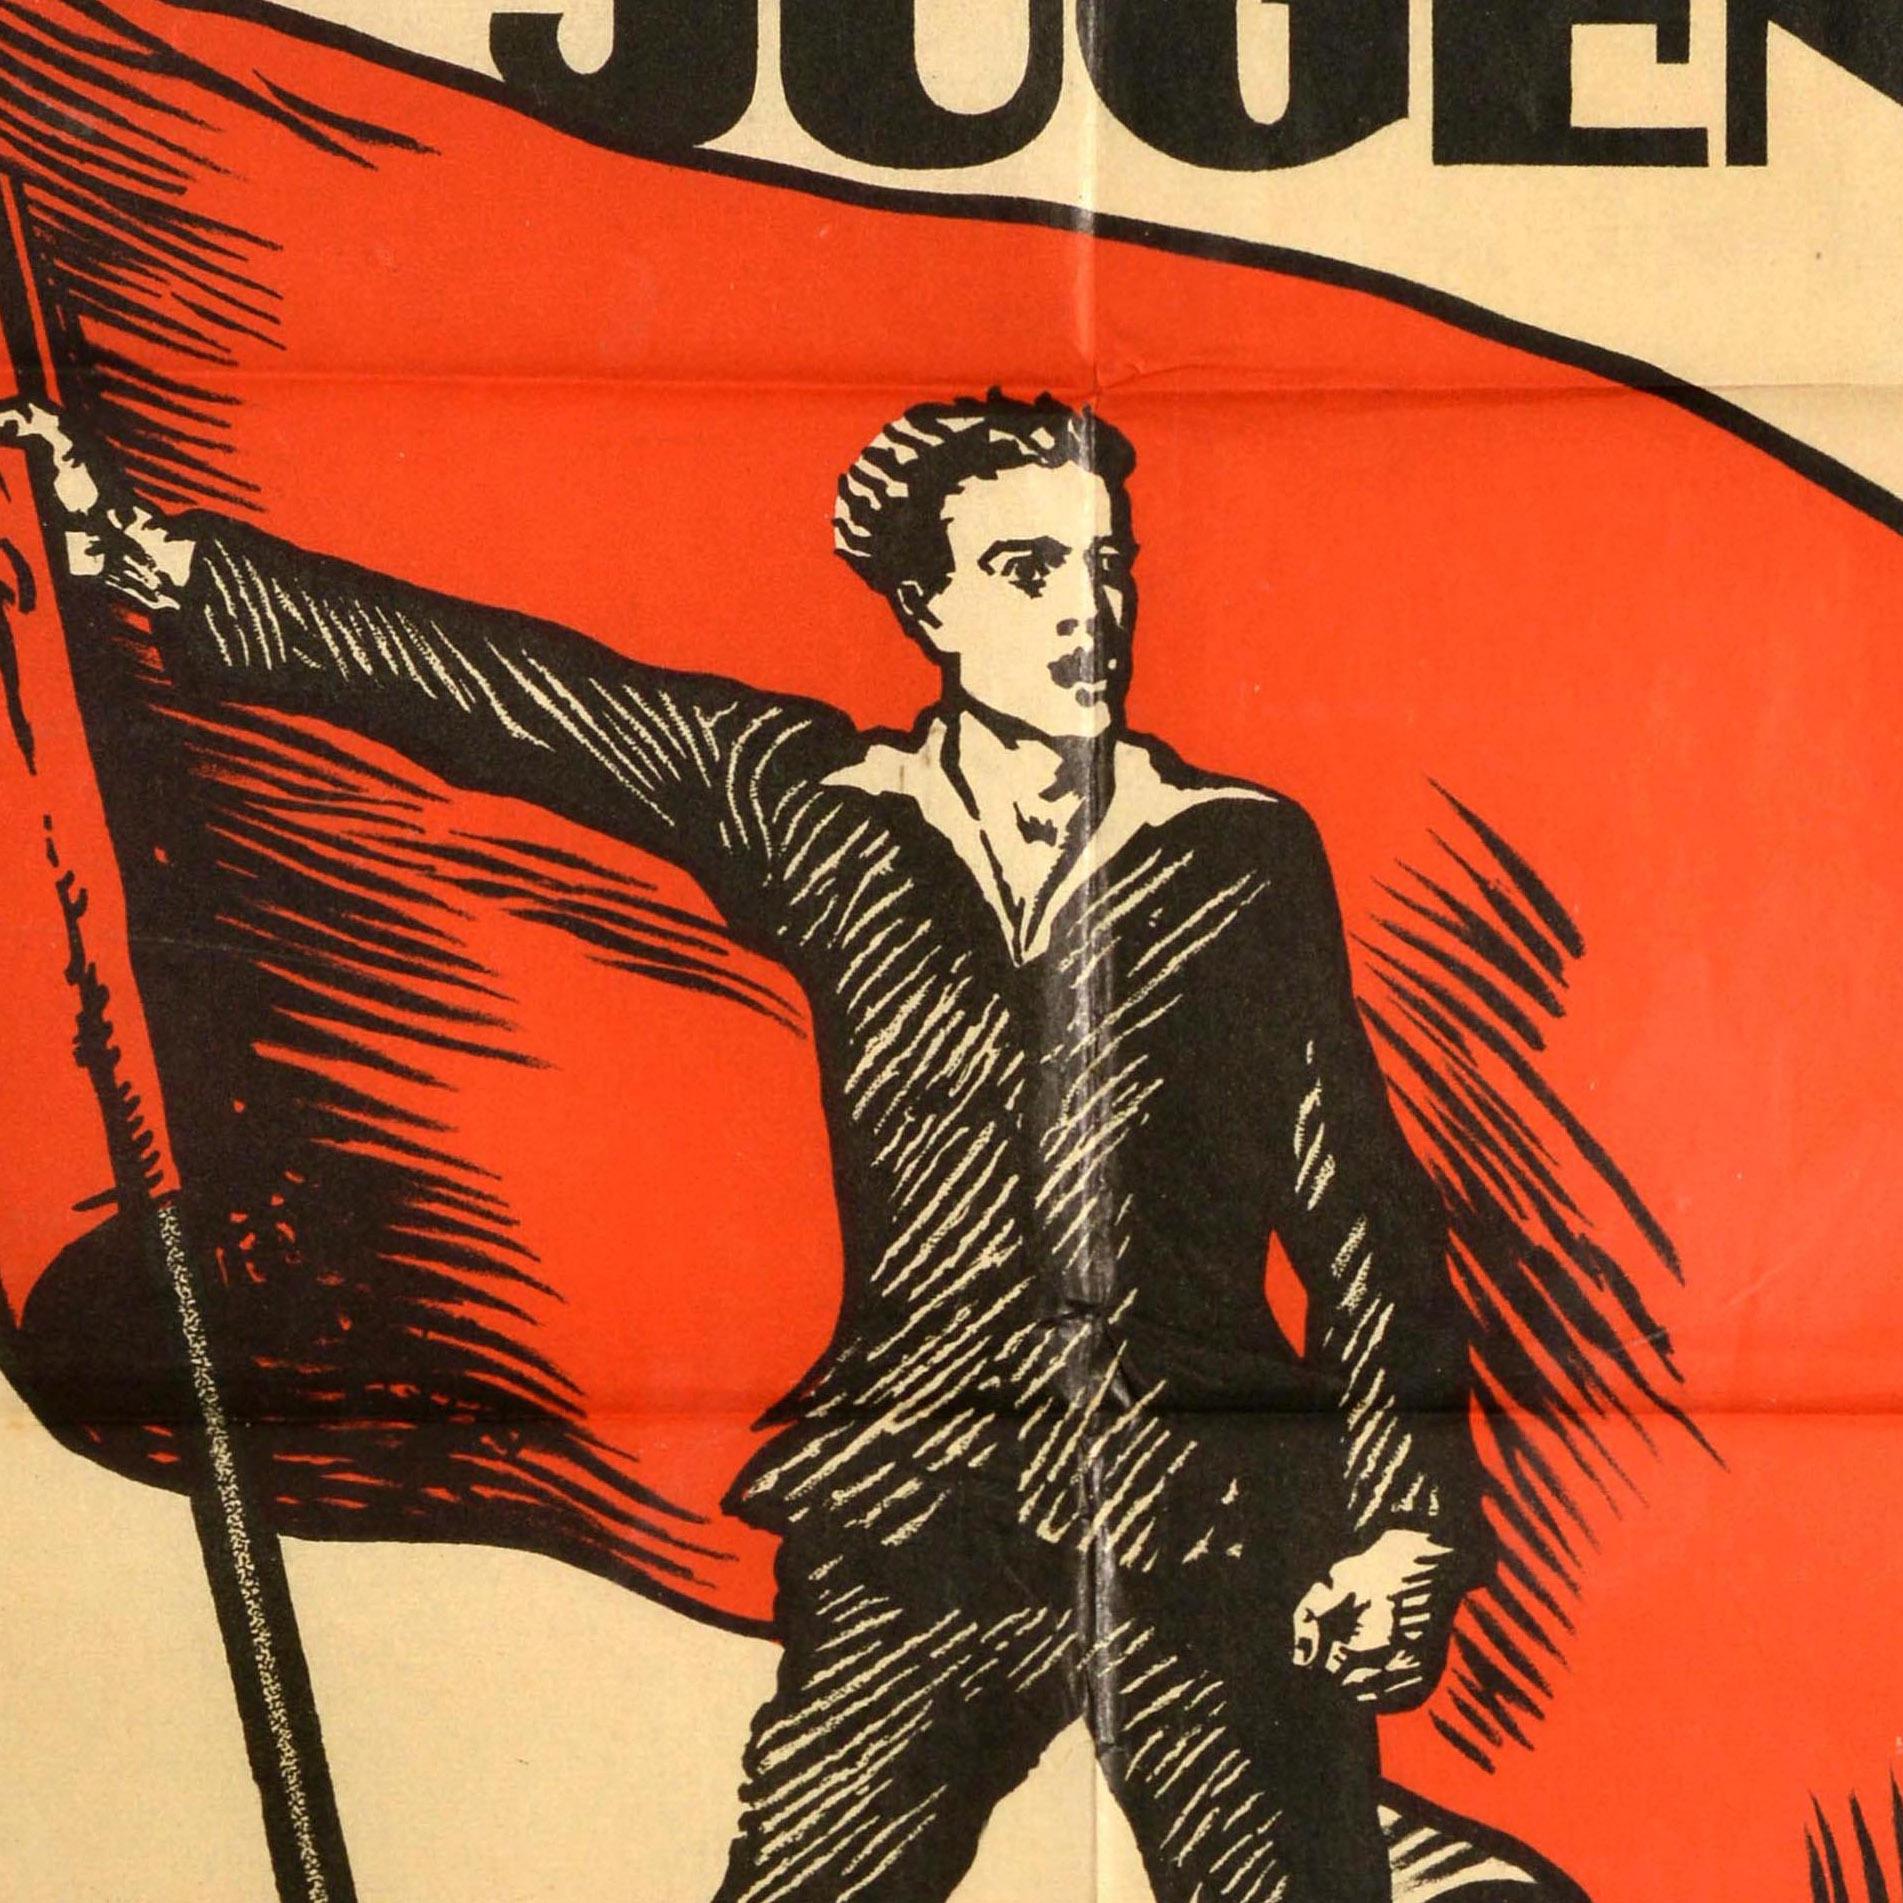 Original vintage propaganda poster - Arbeiter Jugend hinein in die Arbeiter Jugendvereine / Workers' Youth into the Workers' Youth Associations - featuring an illustration of a young man waving a large red banner with his fist clenched, the bold